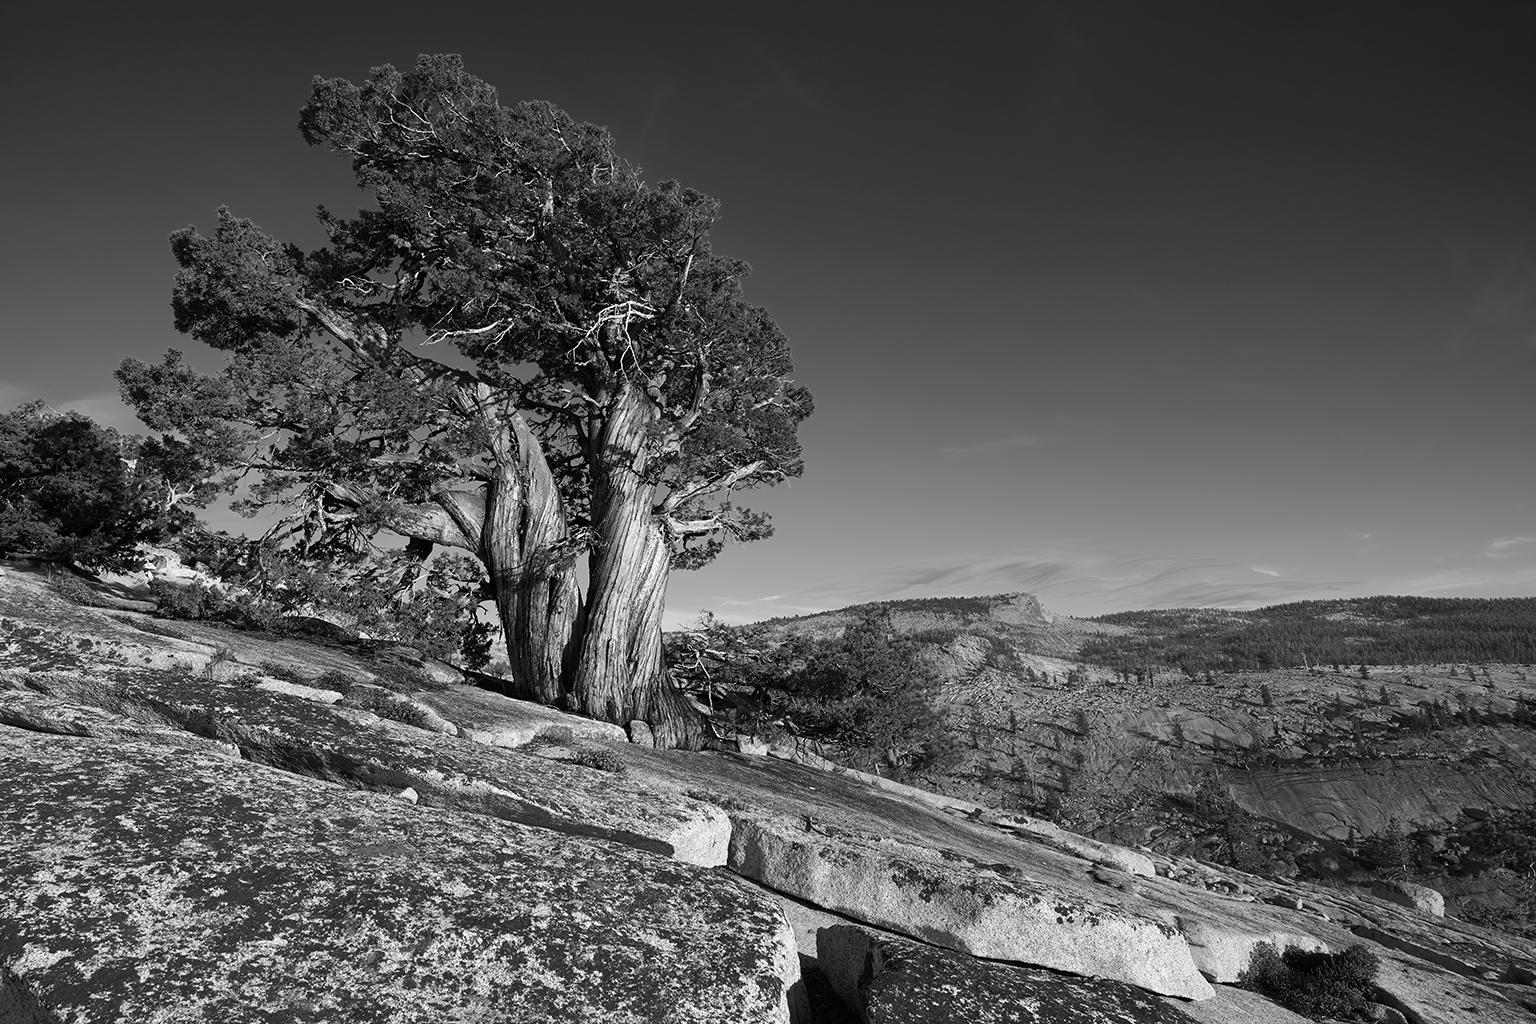 Tree Study II - large scale photograph of dramatic mountain landscape